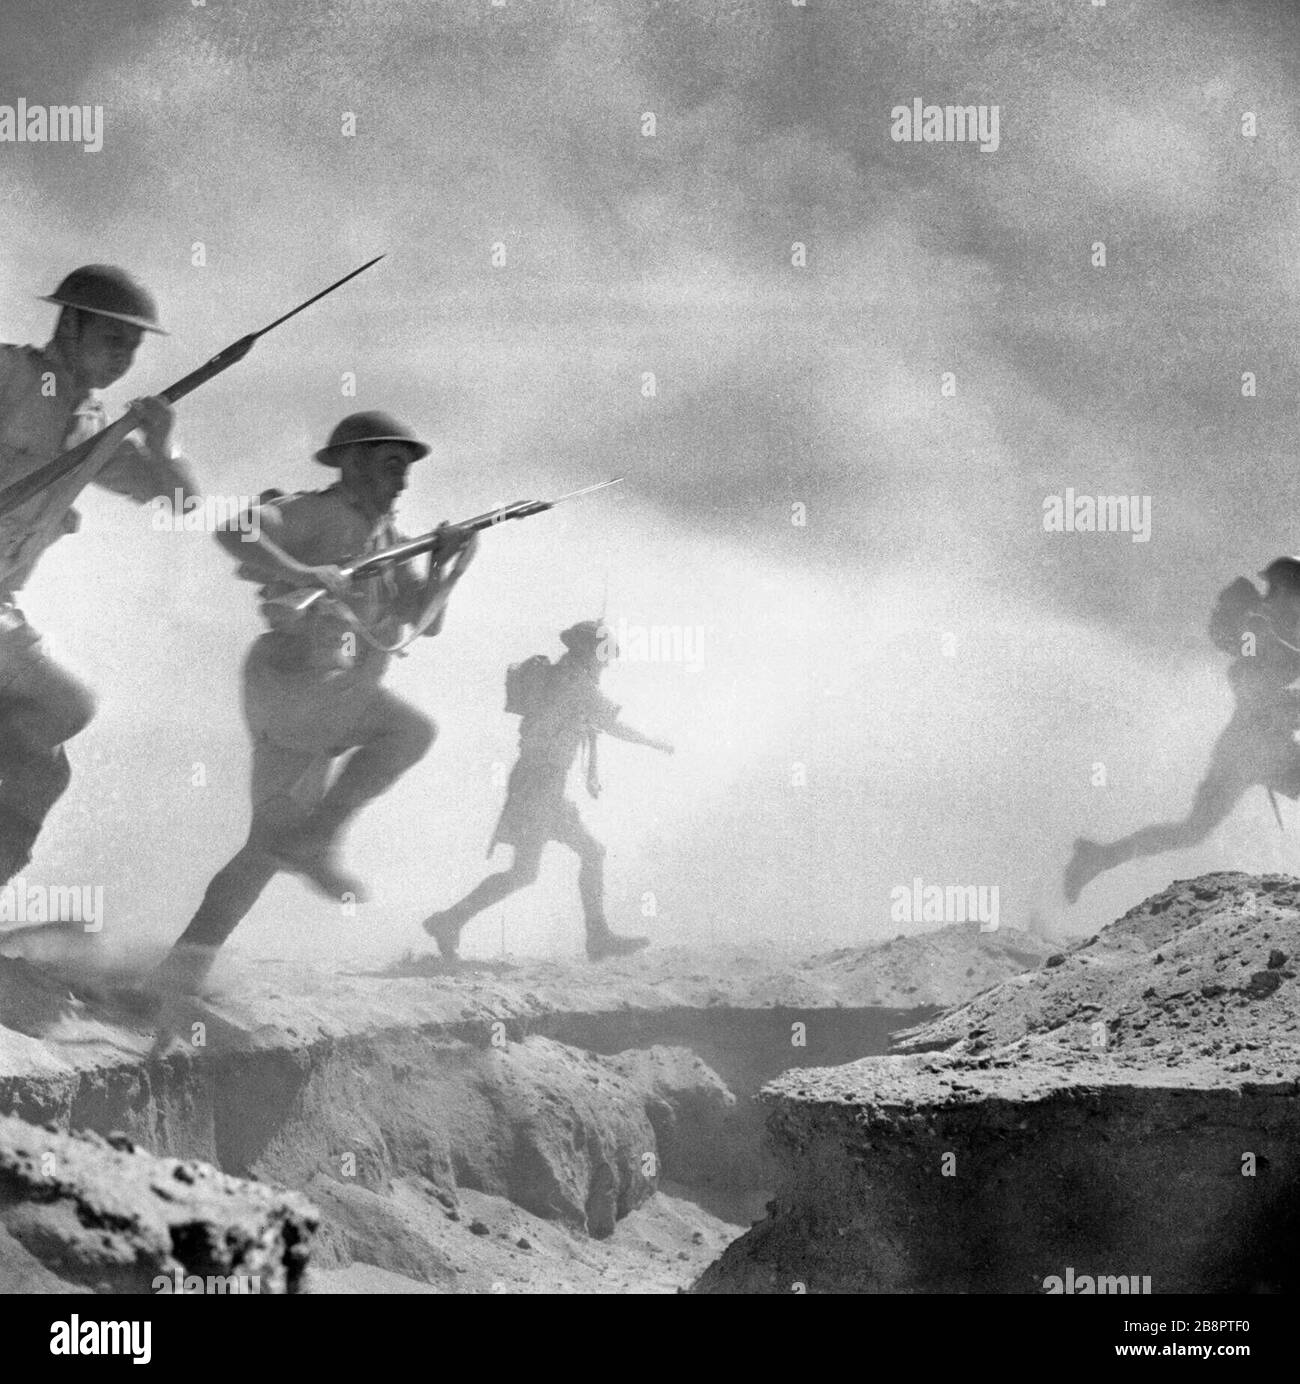 El Alamein 1942: British infantry advances through the dust and smoke of the battle. 24 October 1942 Stock Photo